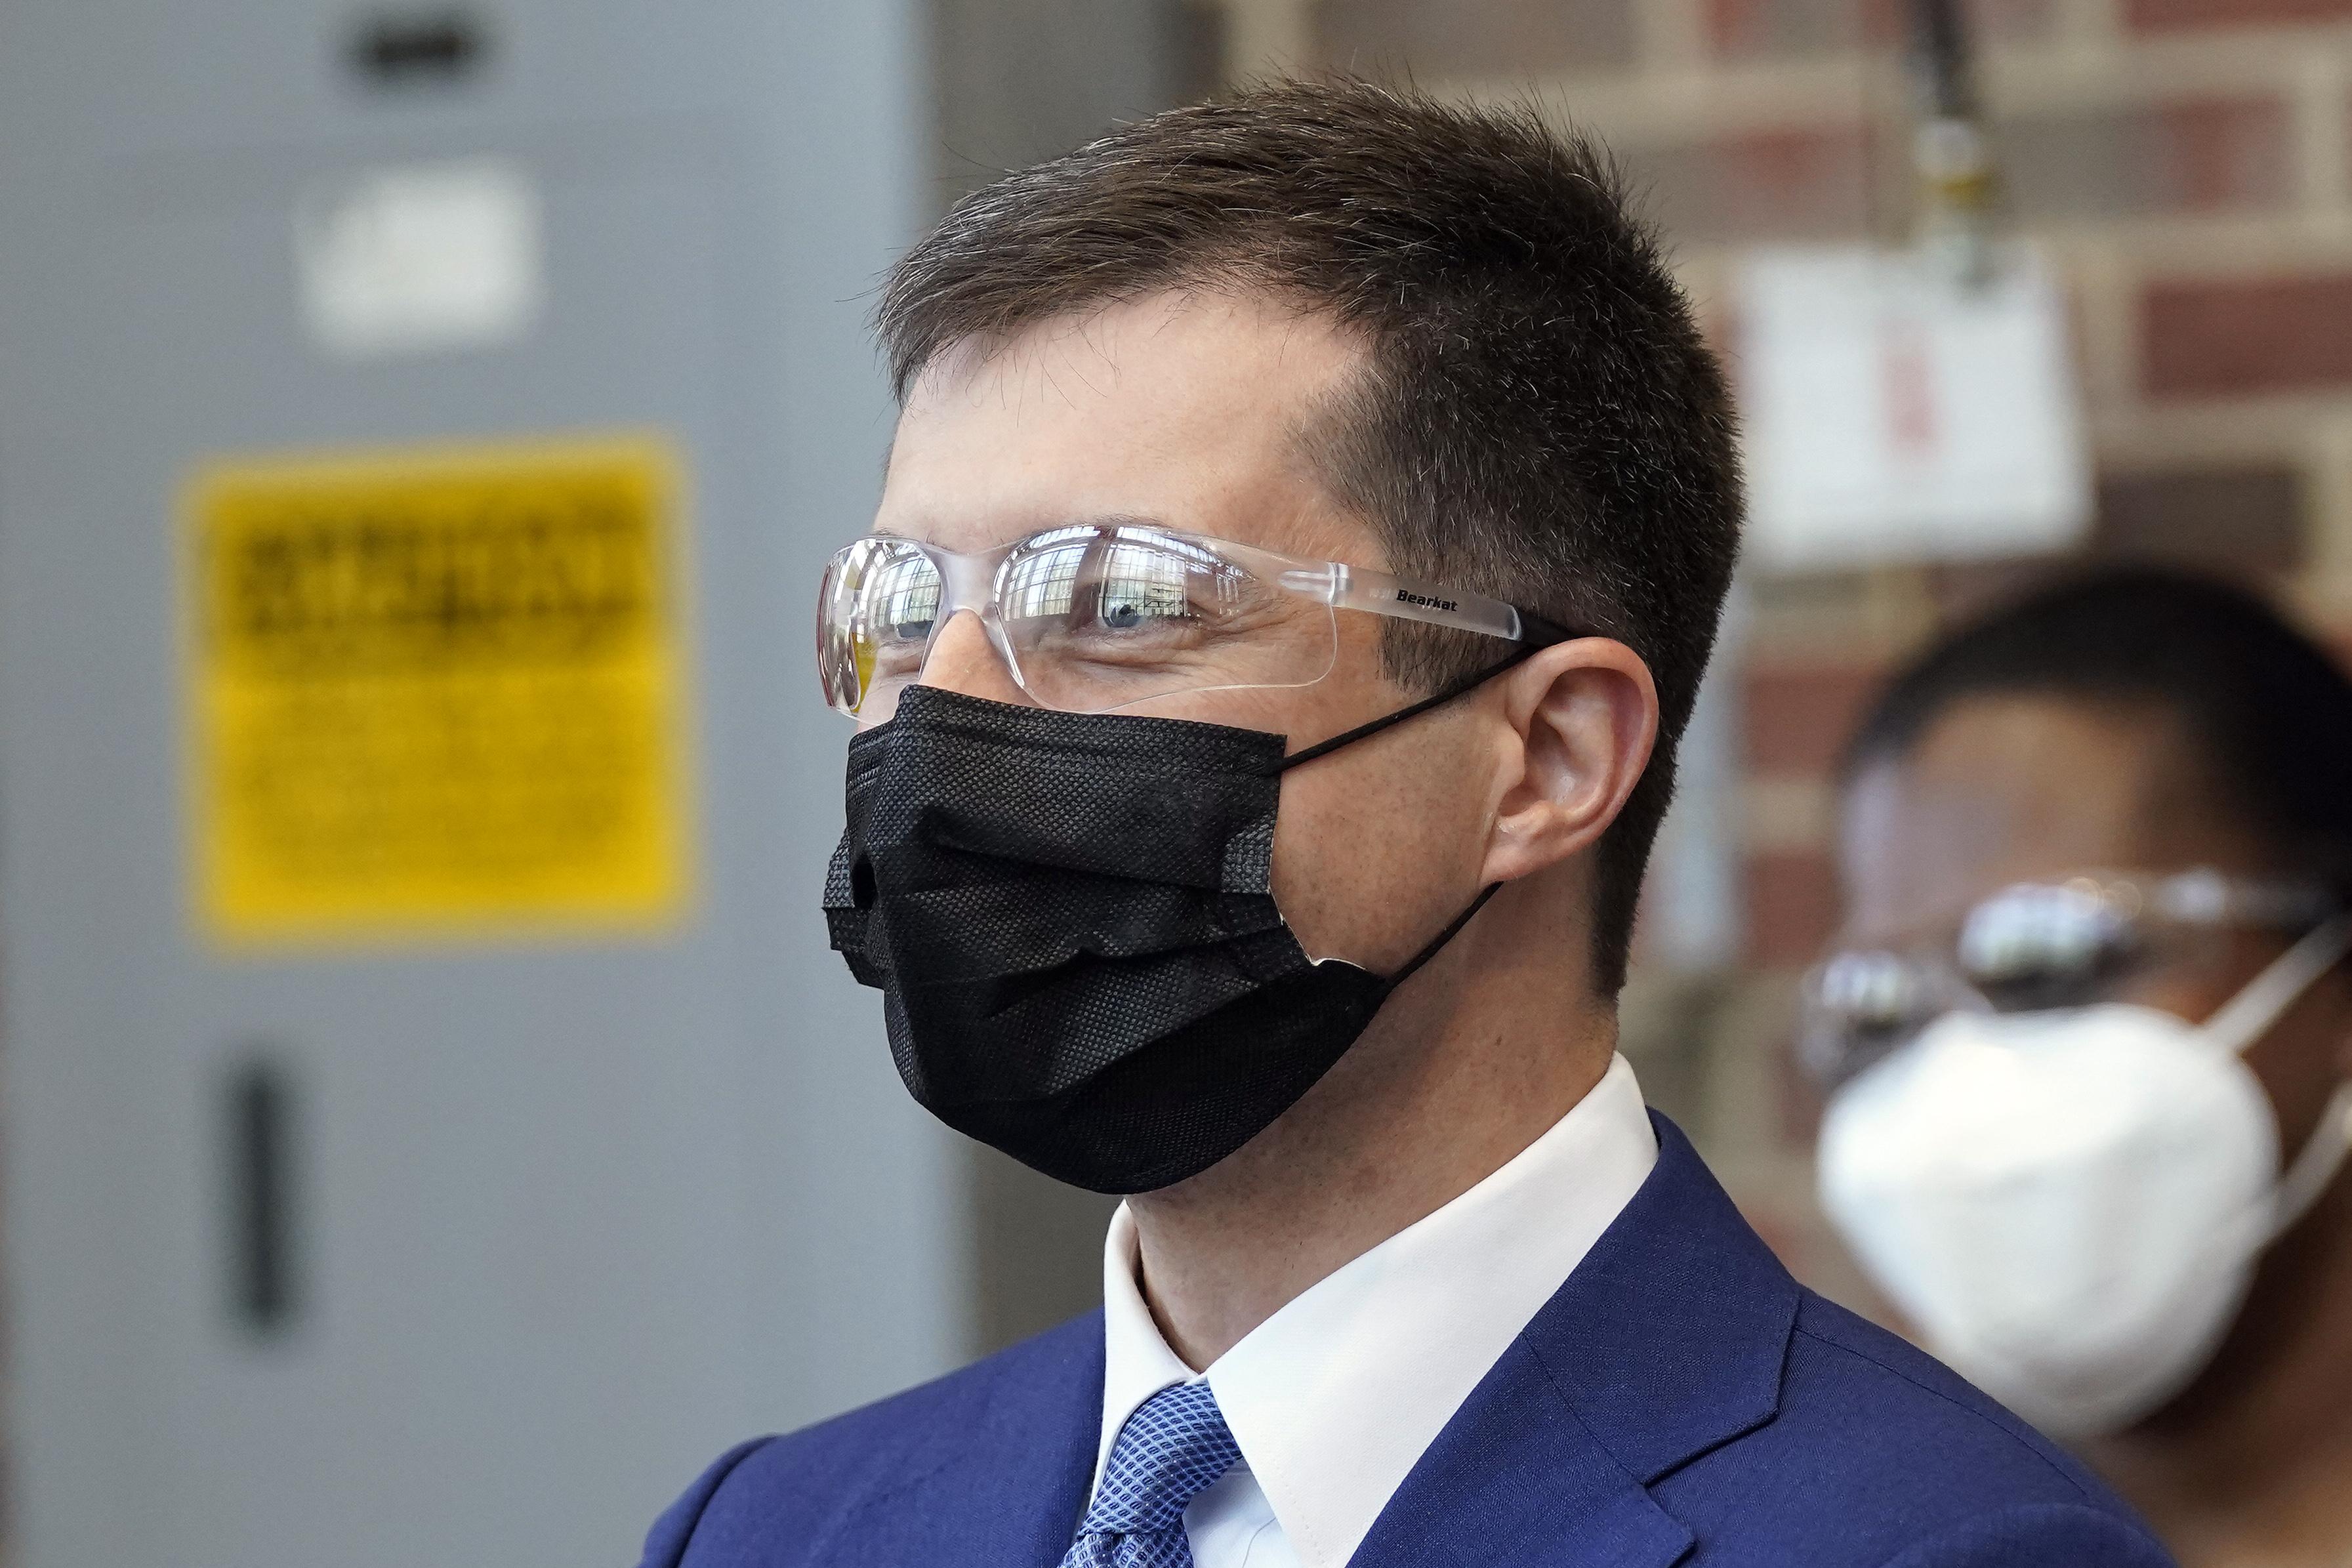 Pete Buttigieg wearing safety glasses and a mask at a demonstration in the engineering department at North Carolina State University on April 30